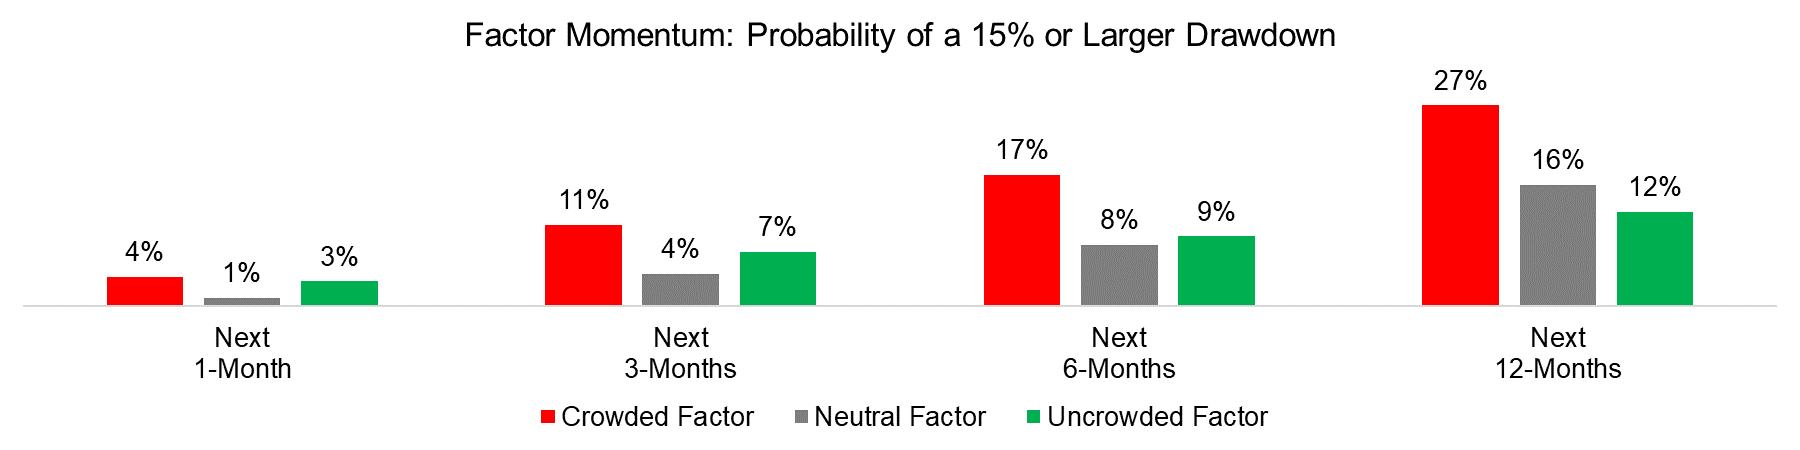 Factor Momentum Probability of a 15% or Larger Drawdown